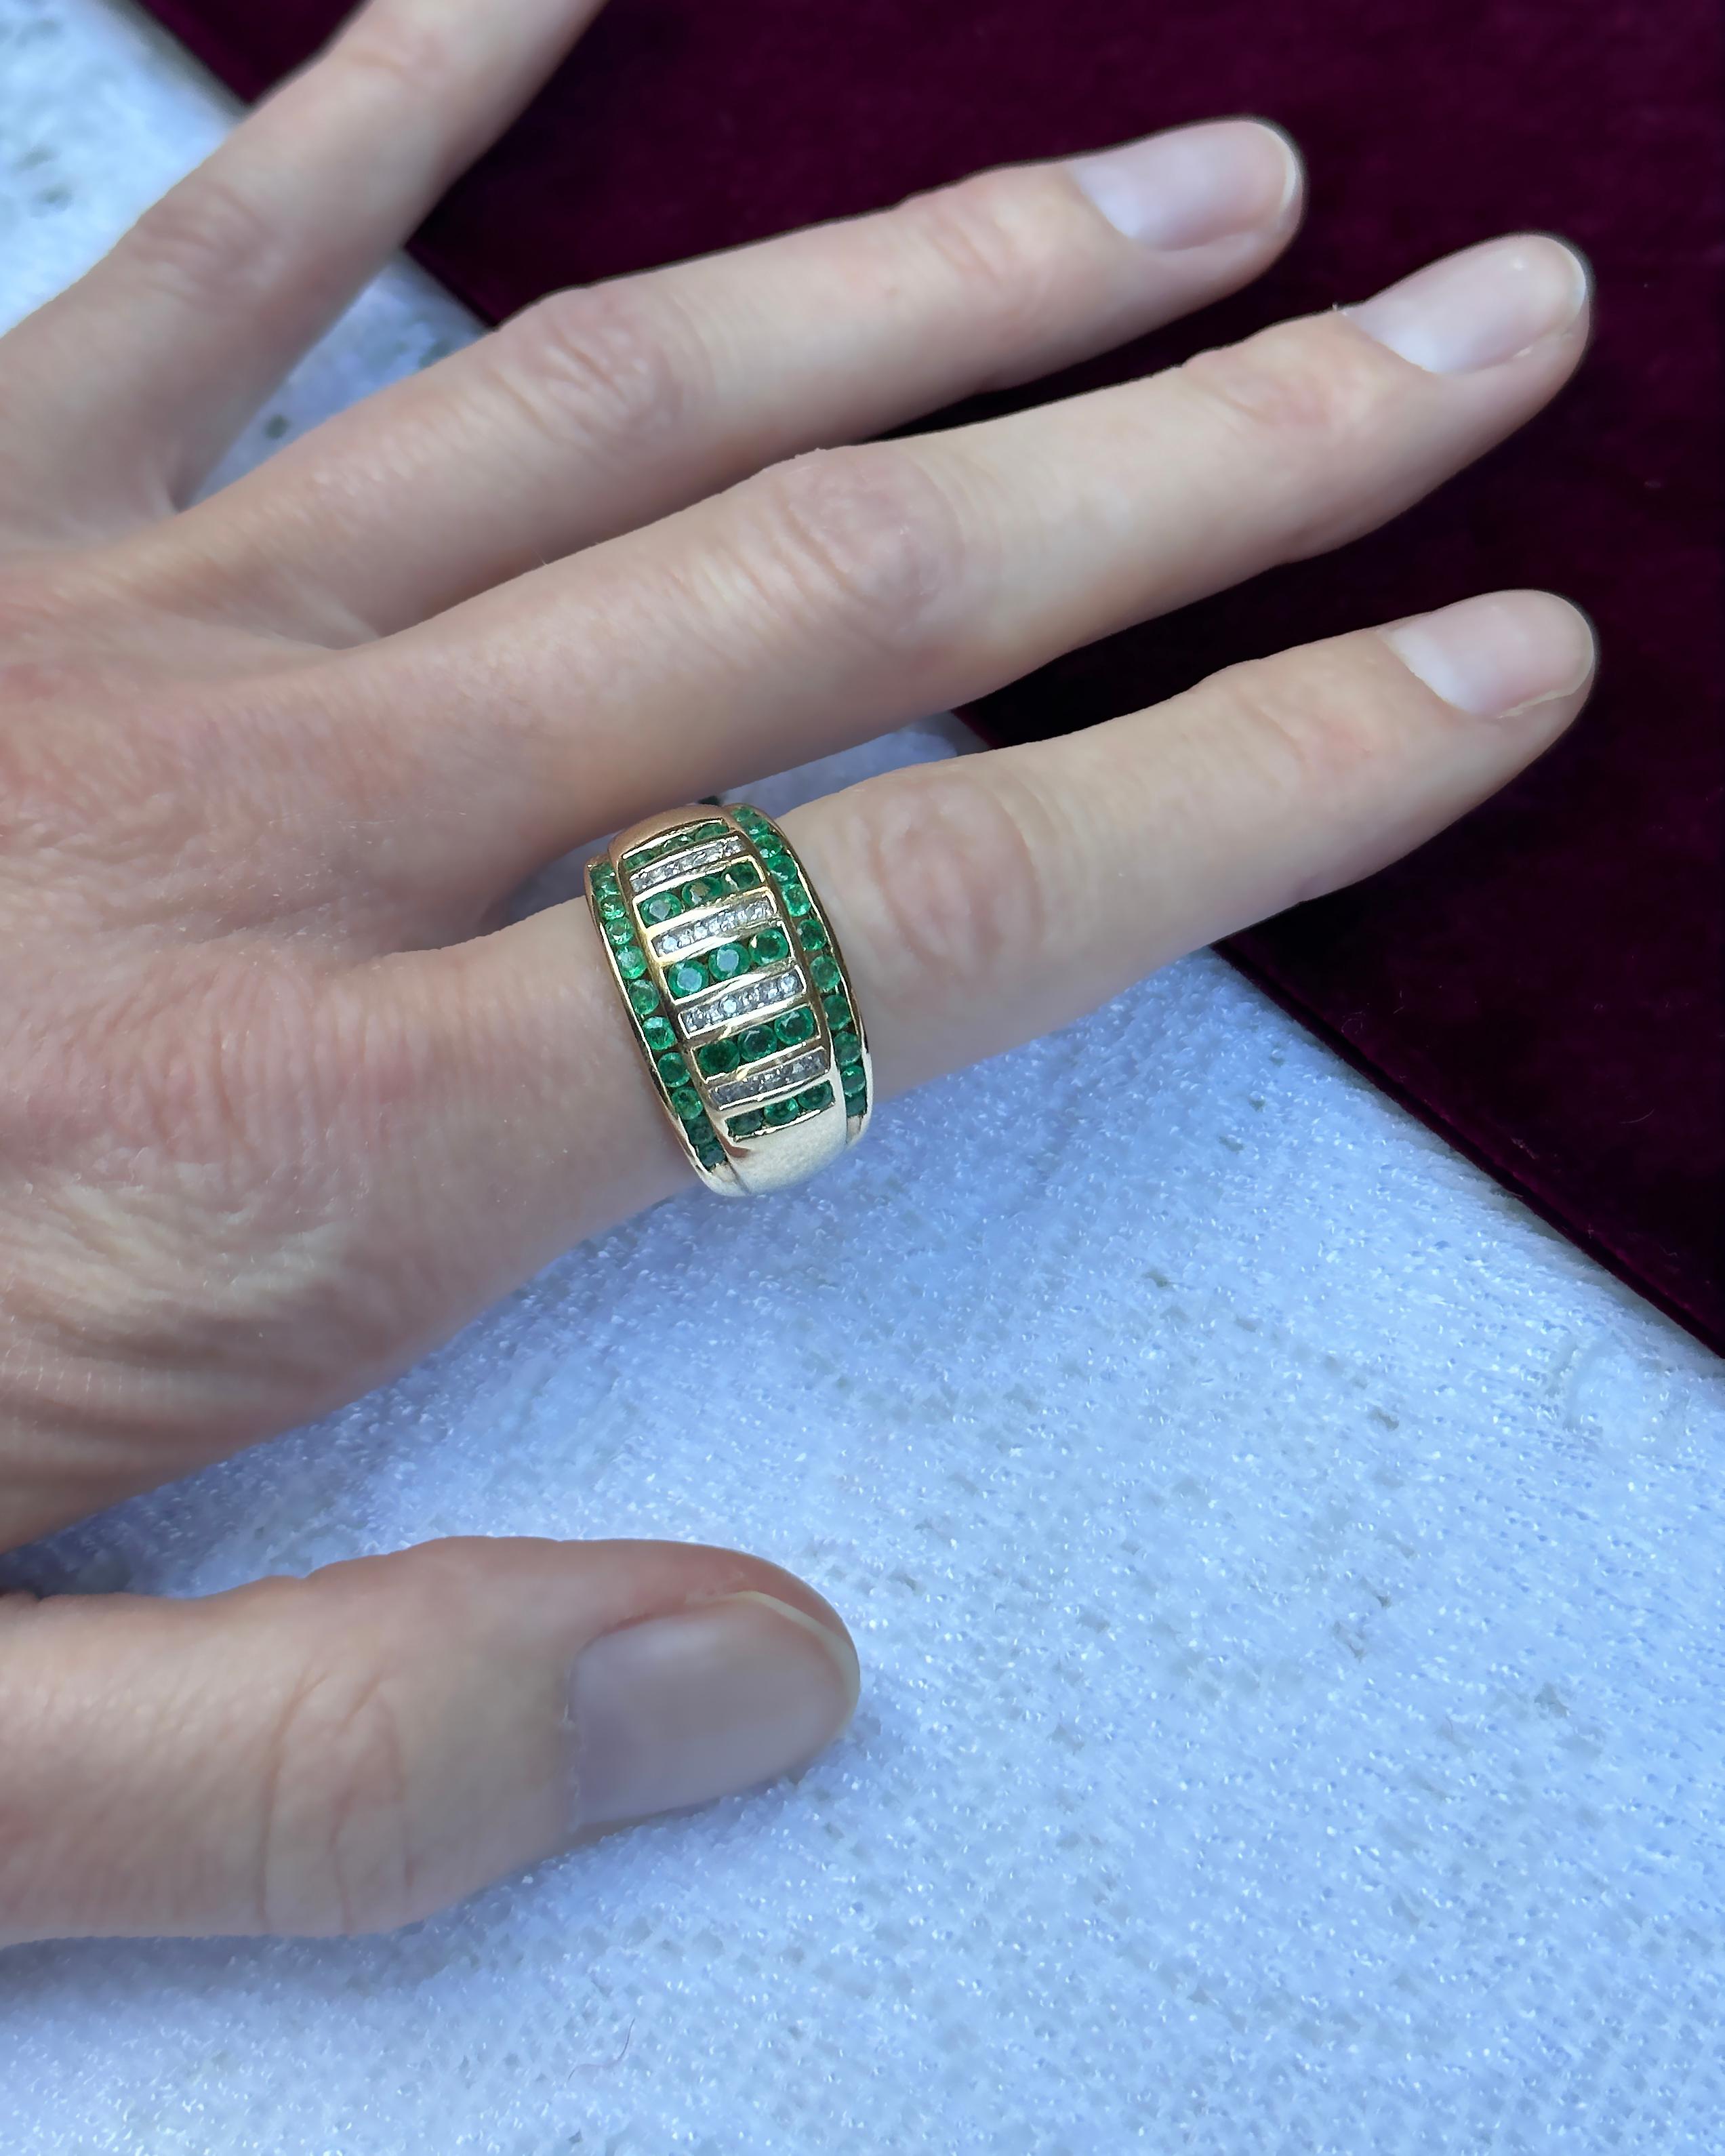 This vintage emerald and diamond bombe ring is a chic and timeless addition to your treasured jewelry collection. It's so special, yet also works for everyday wear, and stacks so well with other rings. Round diamond and emeralds are channel-set into